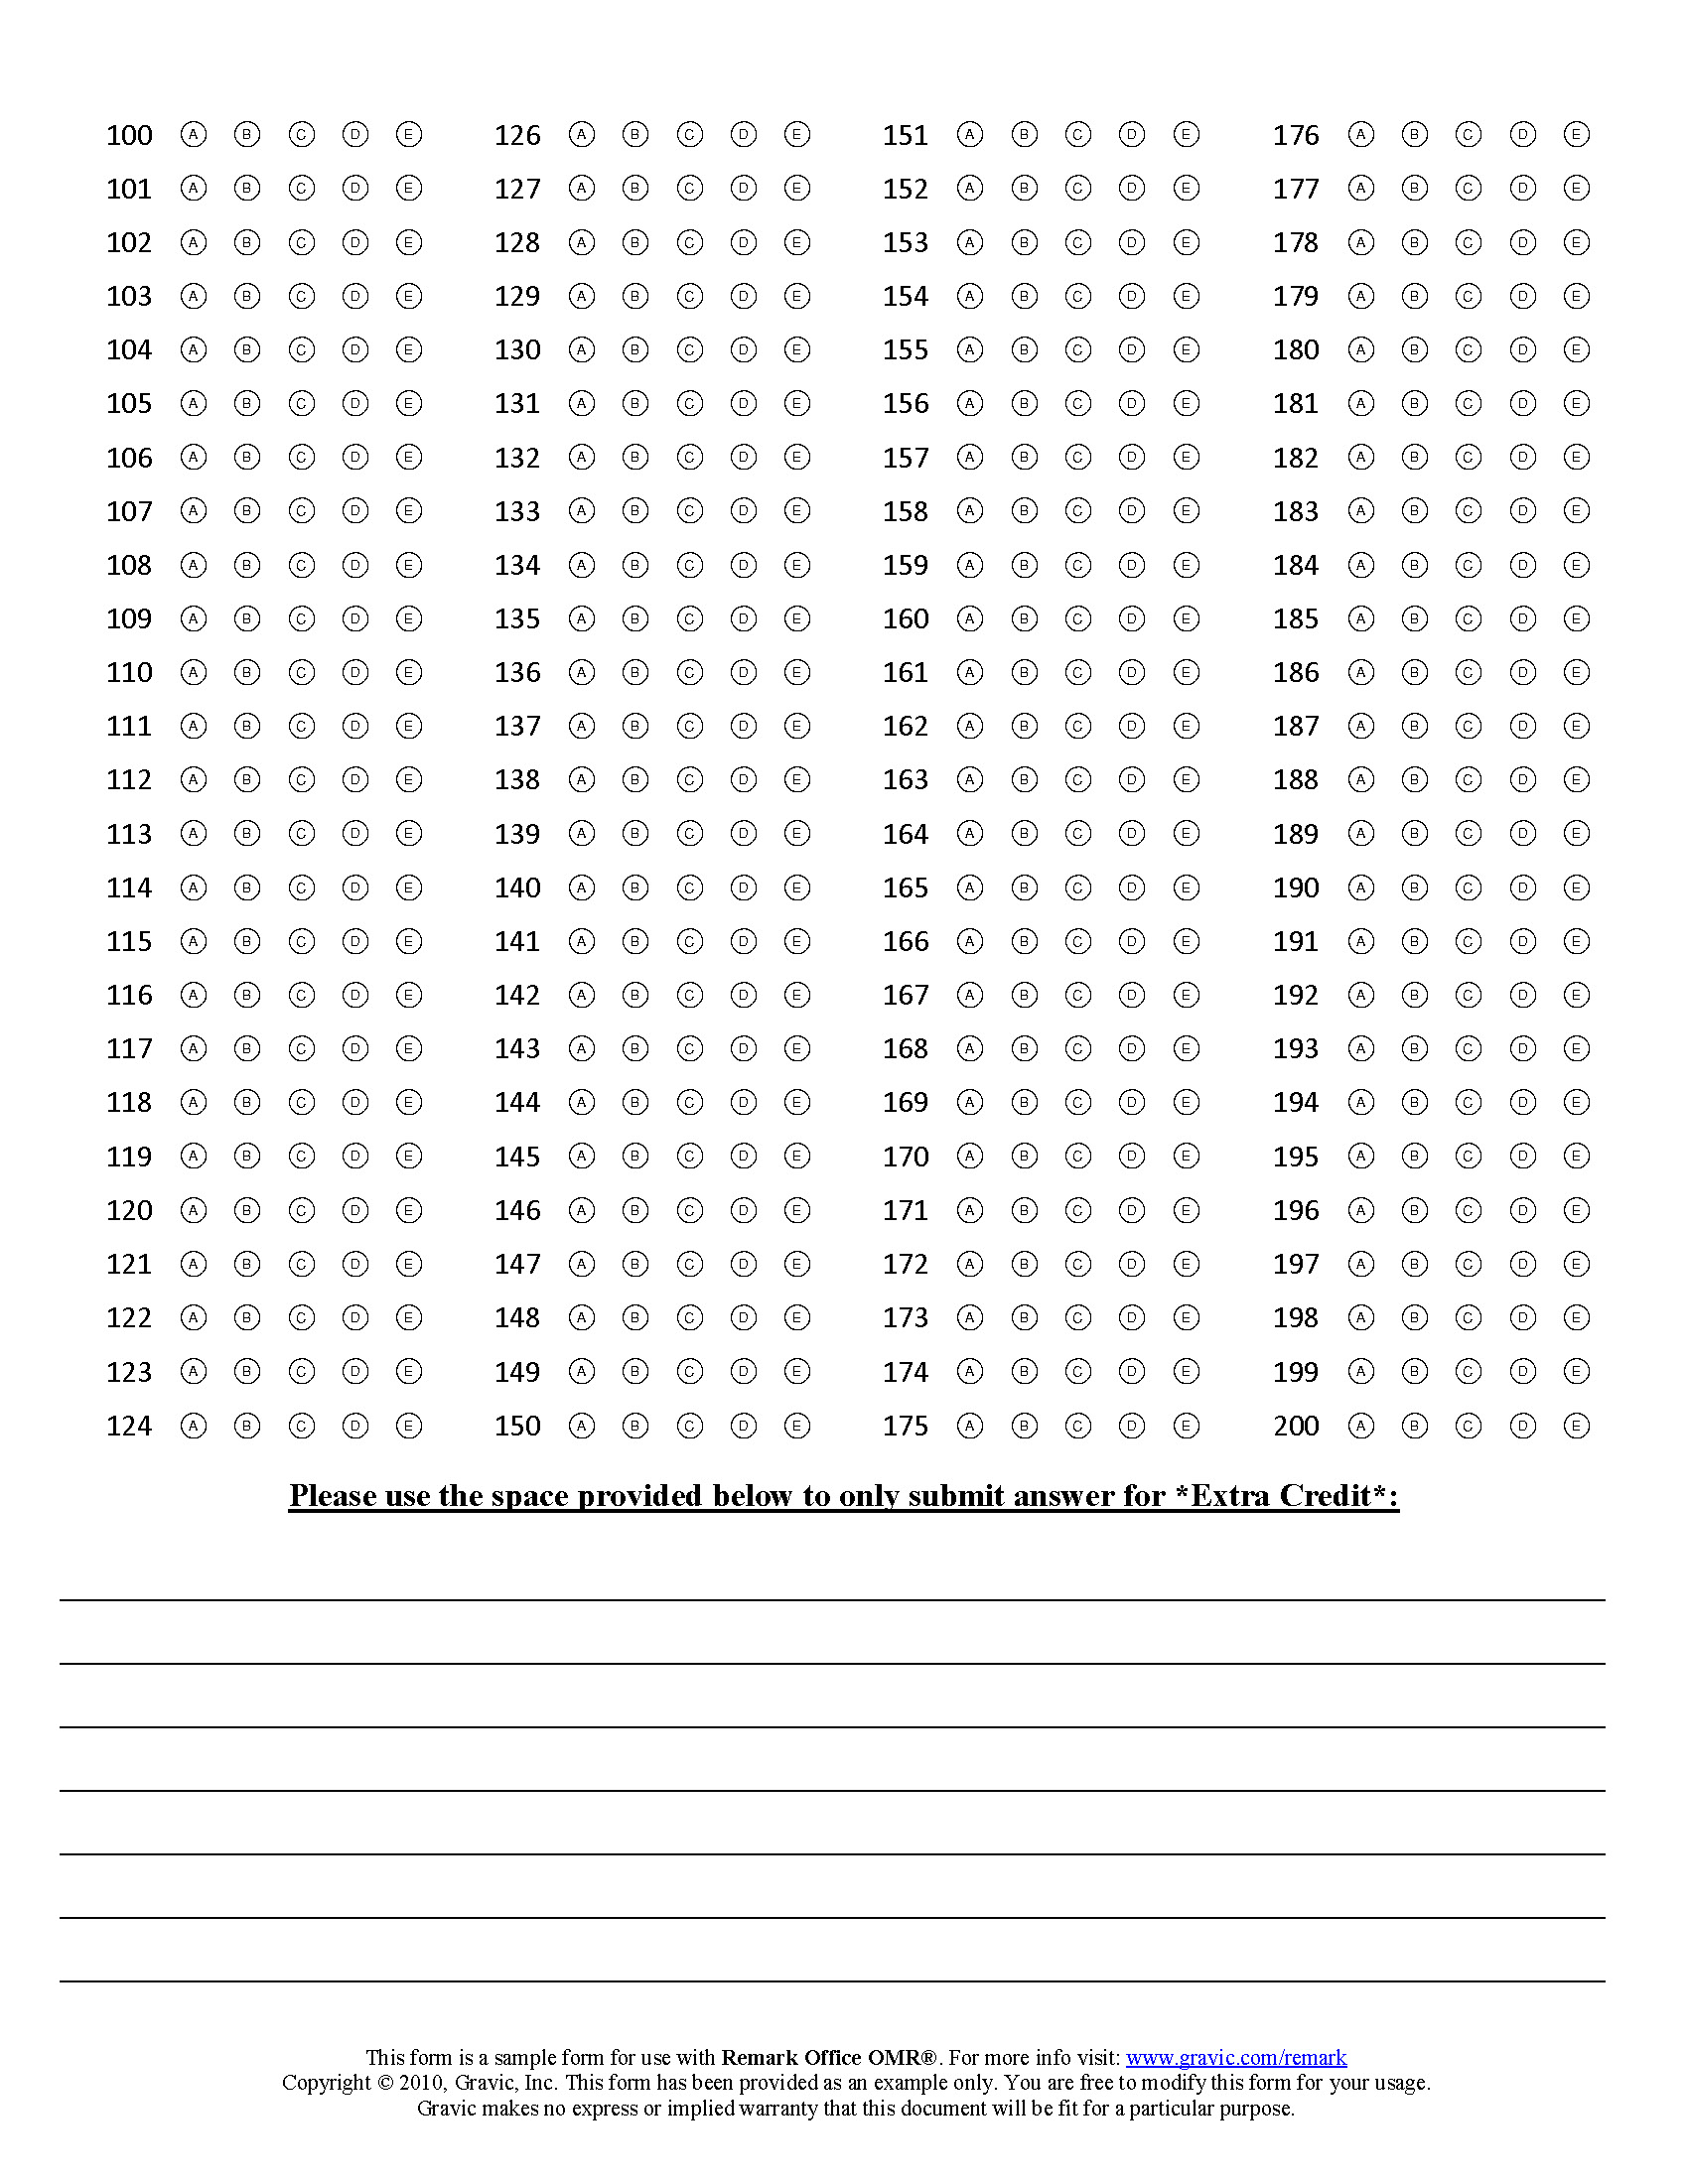 200 Question Answer Sheet with Extra Credit and Barcode · Remark Software